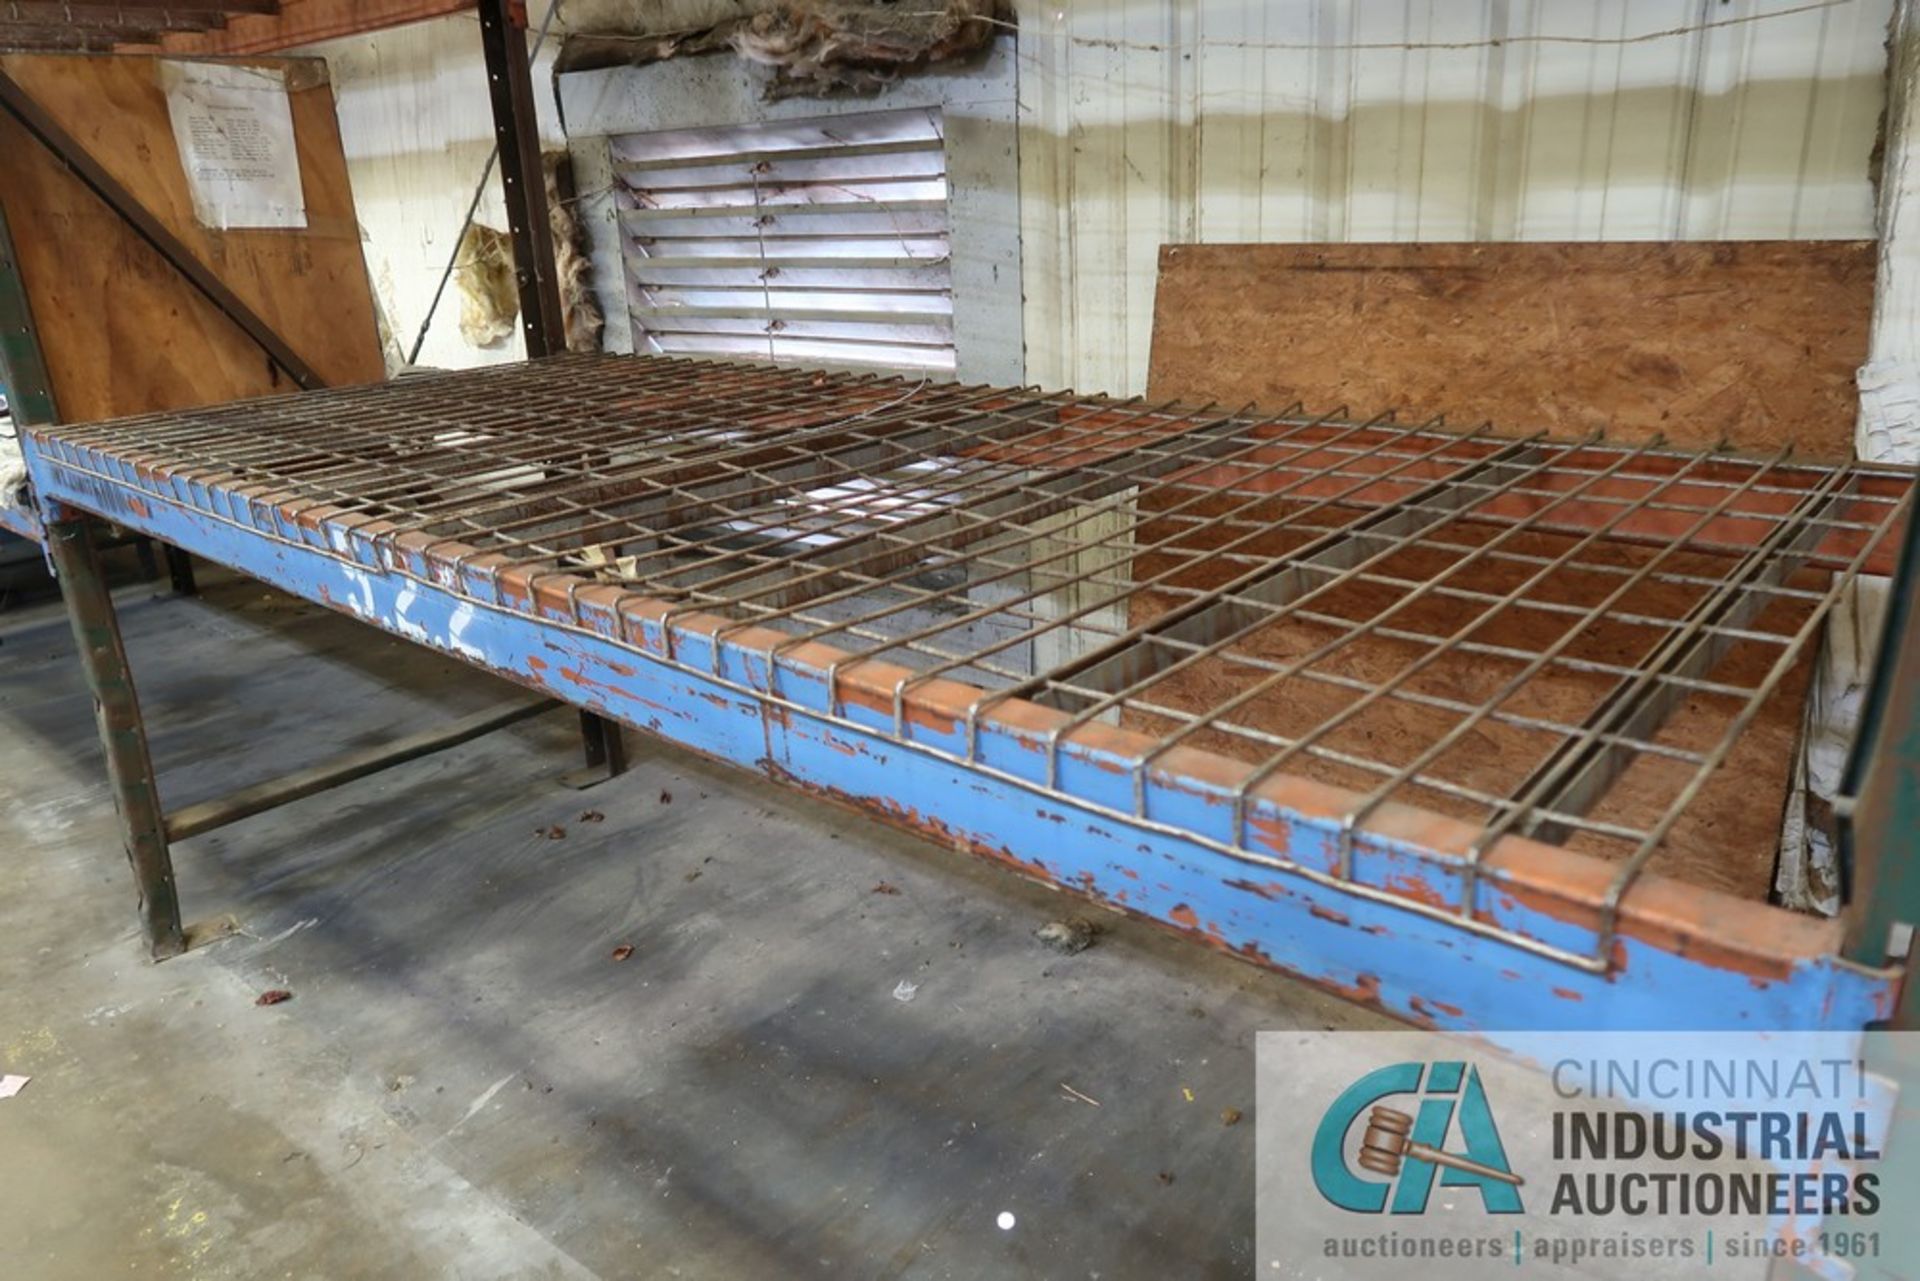 SECTIONS 42" X 100" X 17' HIGH (APPROX.) RIDG-U-RACK ADJUSTABLE BEAM WIRE DECKING PALLET RACK - Image 3 of 4